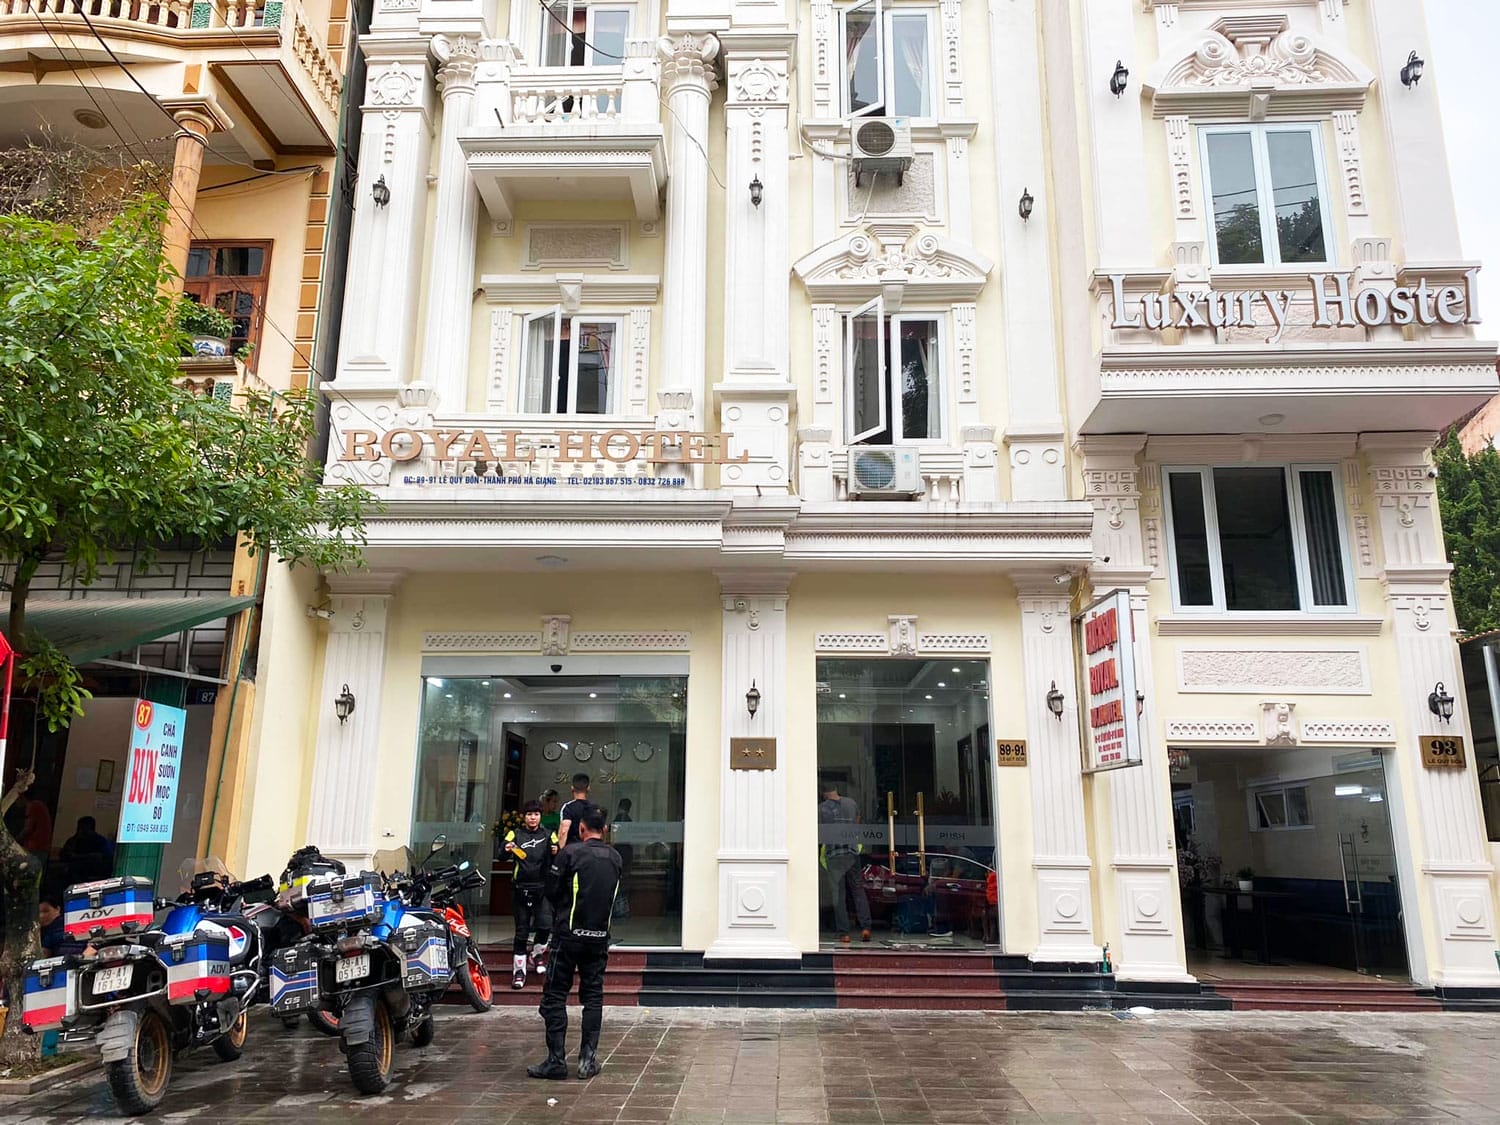 All you need to know about the Accommodations in Vietnam